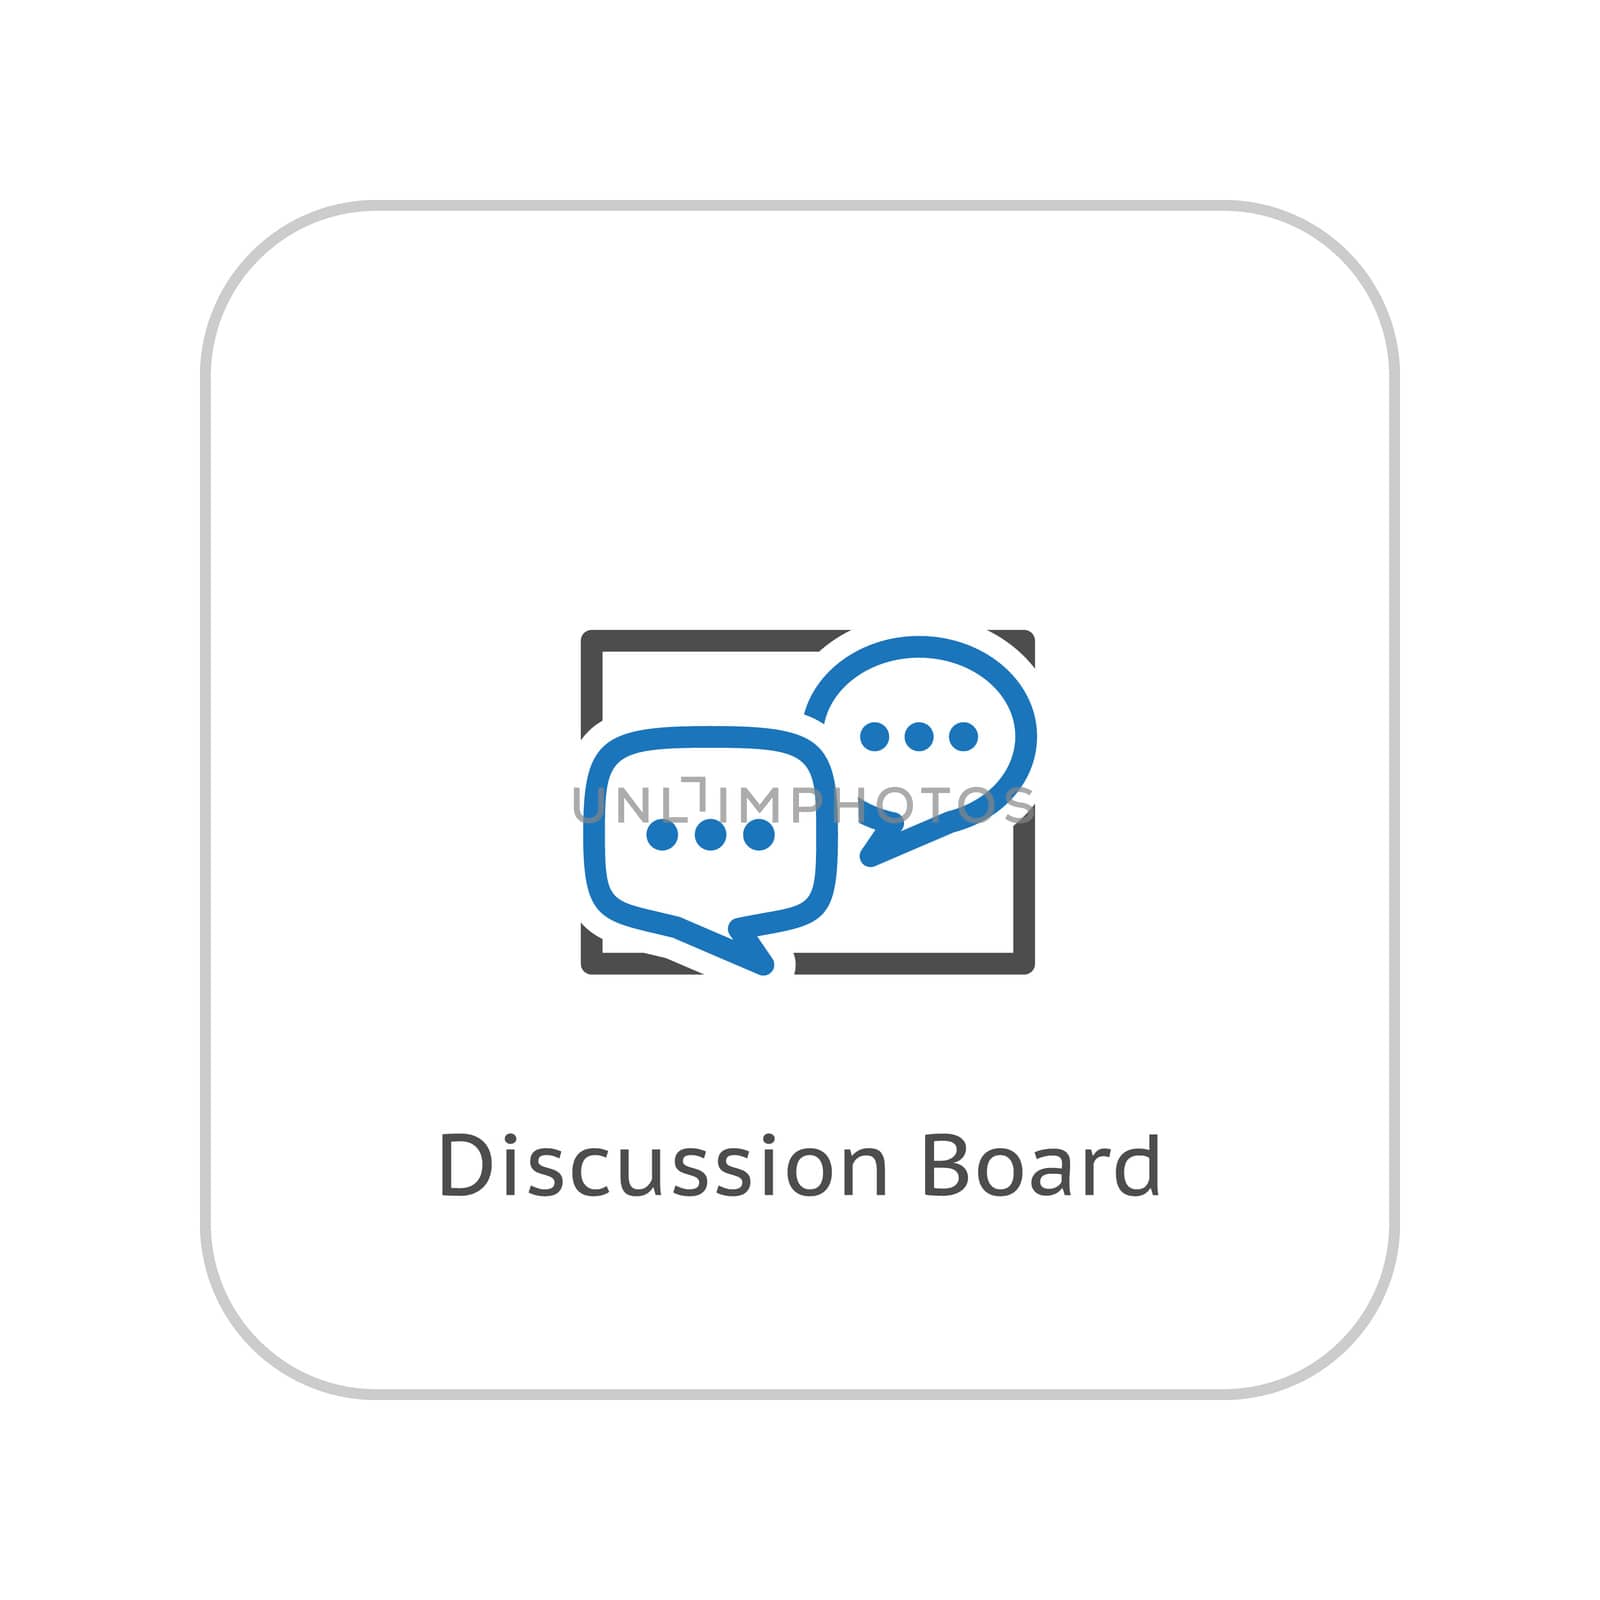 Discussion Board Icon. Business Concept. Flat Design. Isolated Illustration.